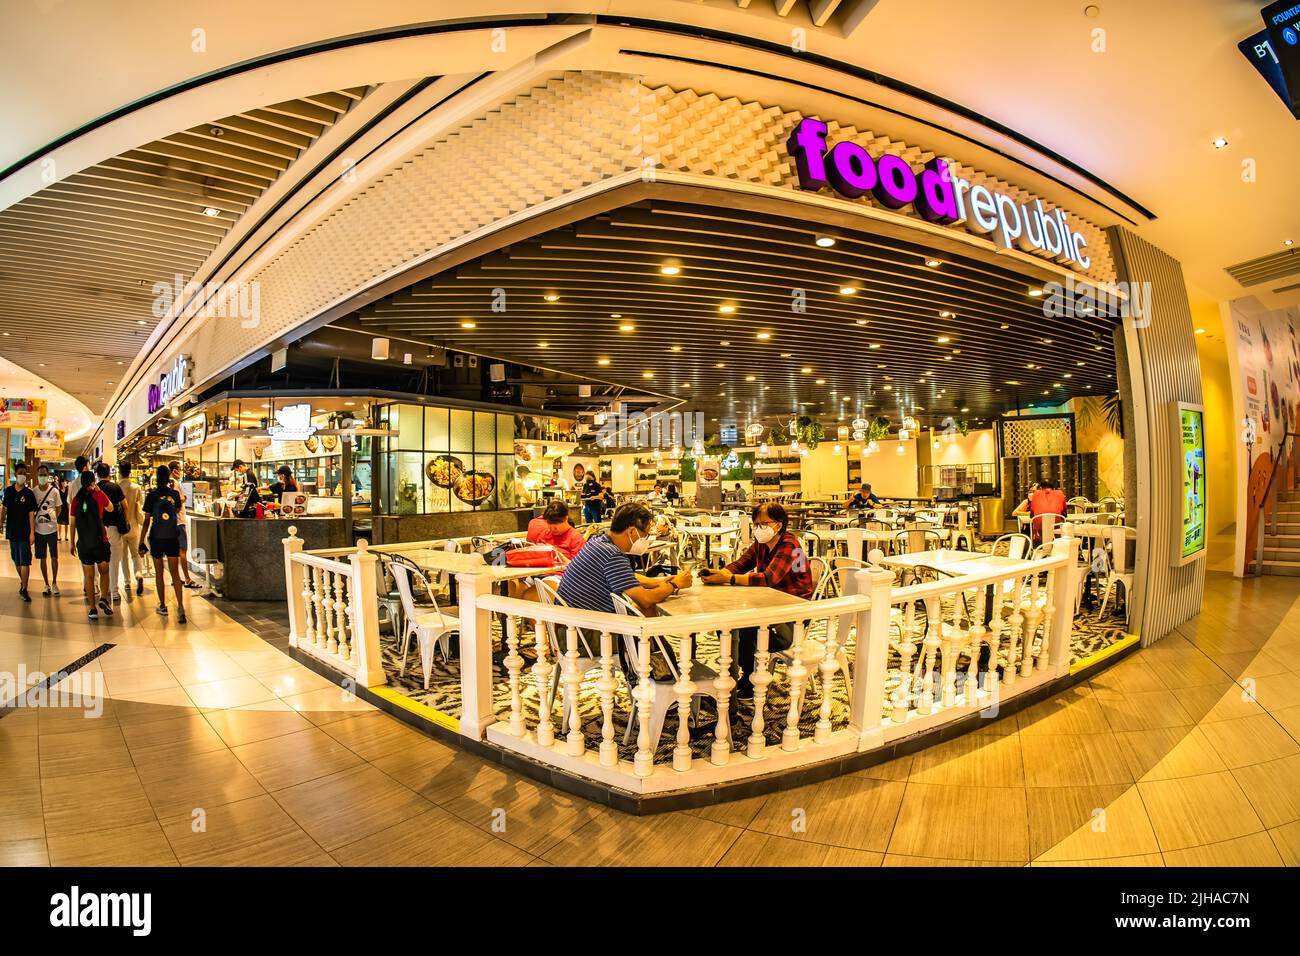 Food Republic restaurant in Suntec City Mall. This food court chain is run by the BreadTalk Group based in Singapore. Stock Photo